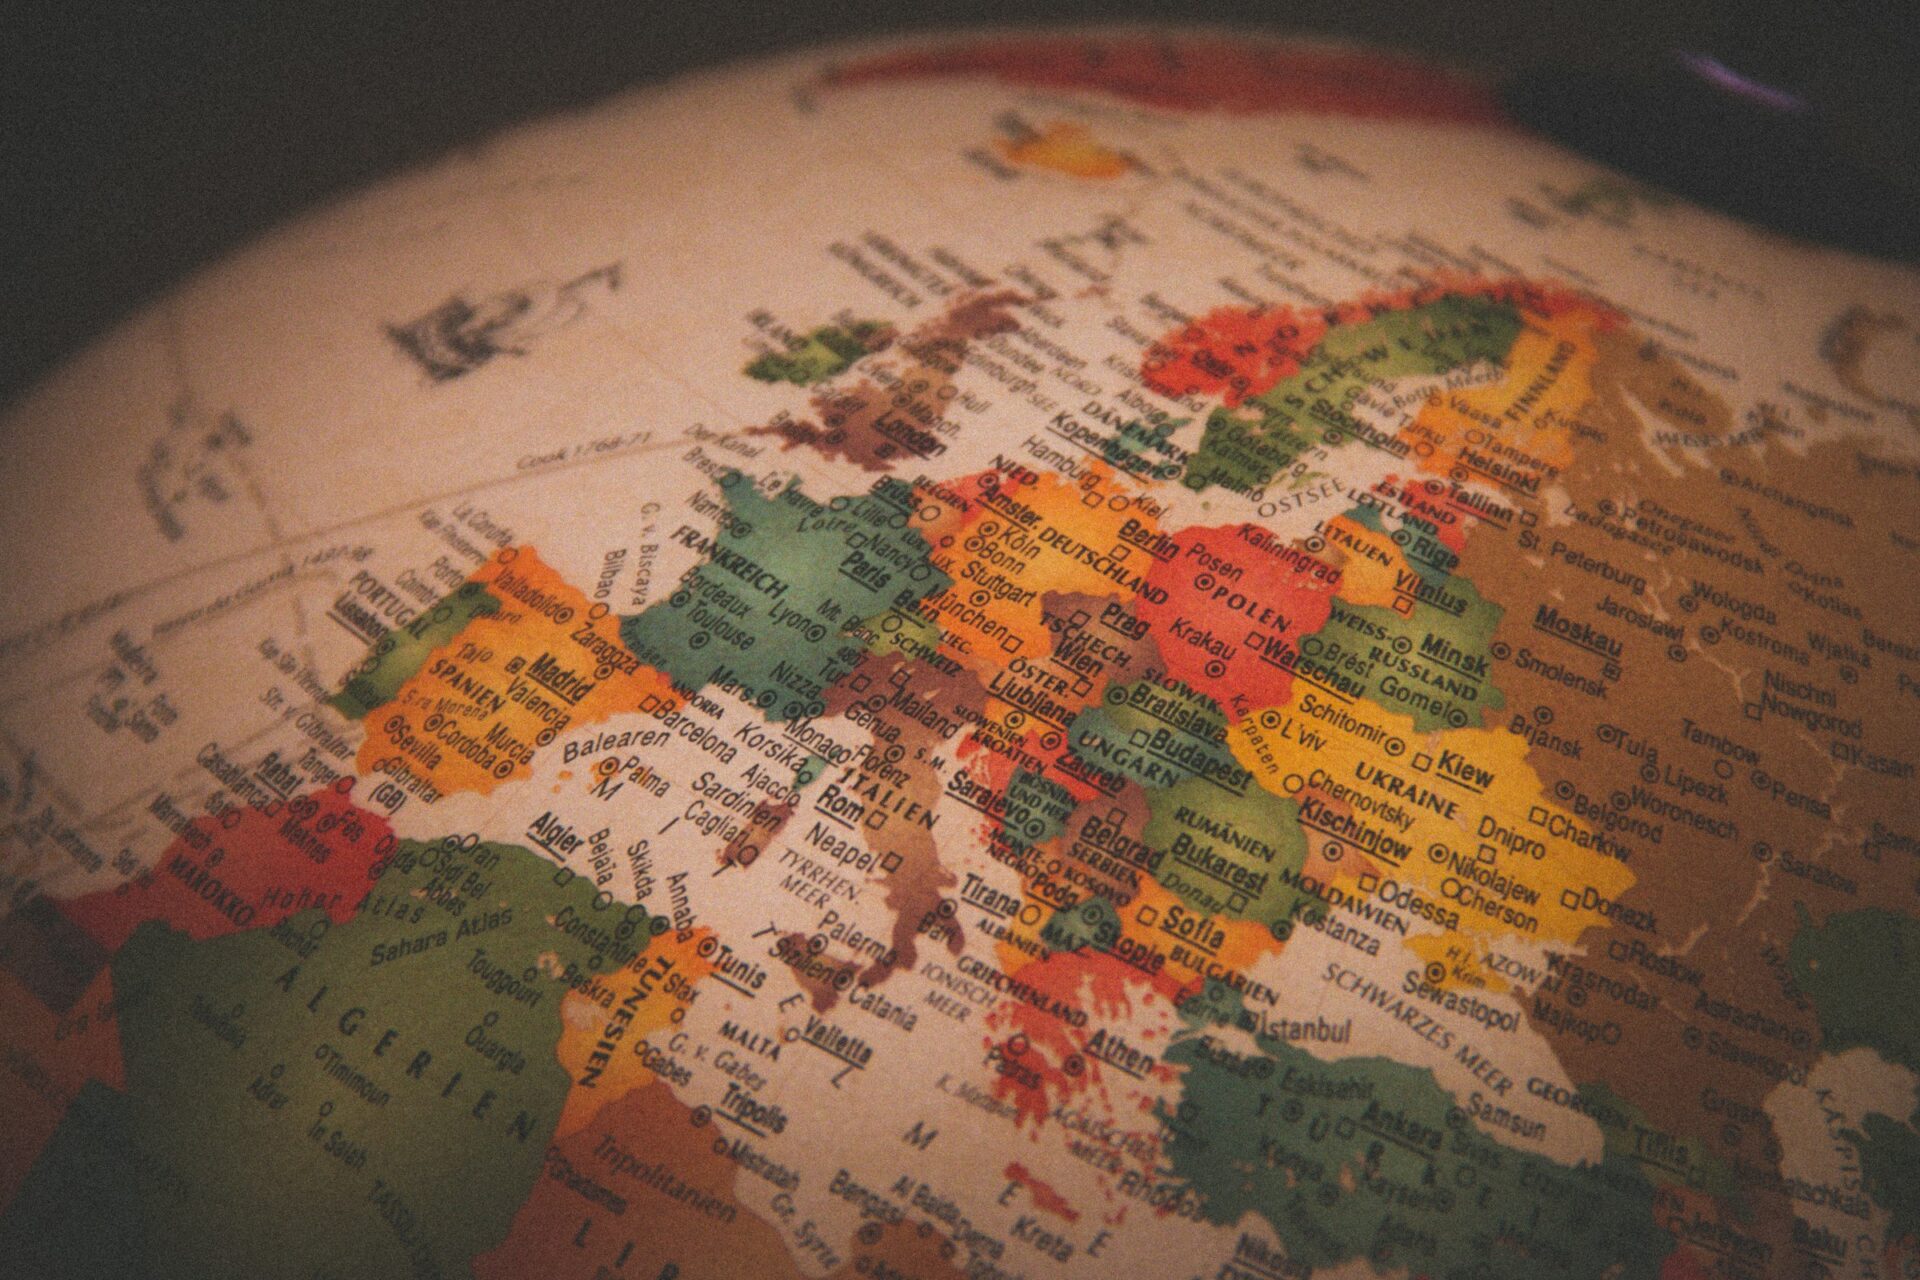 This photo shows a vintage globe with Europe in focus (Christian Lue via Unsplash)